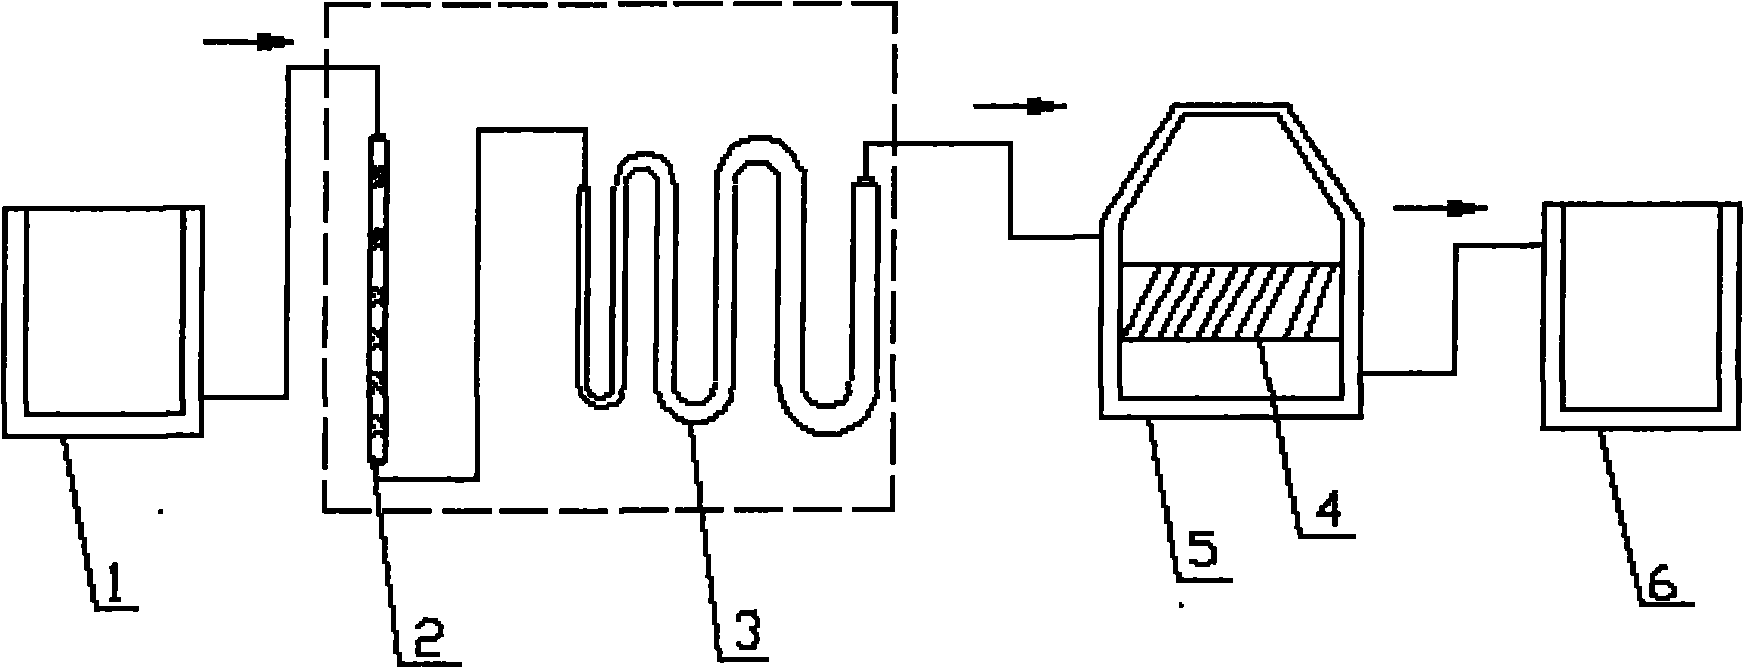 Water treatment device applicable to various water sources